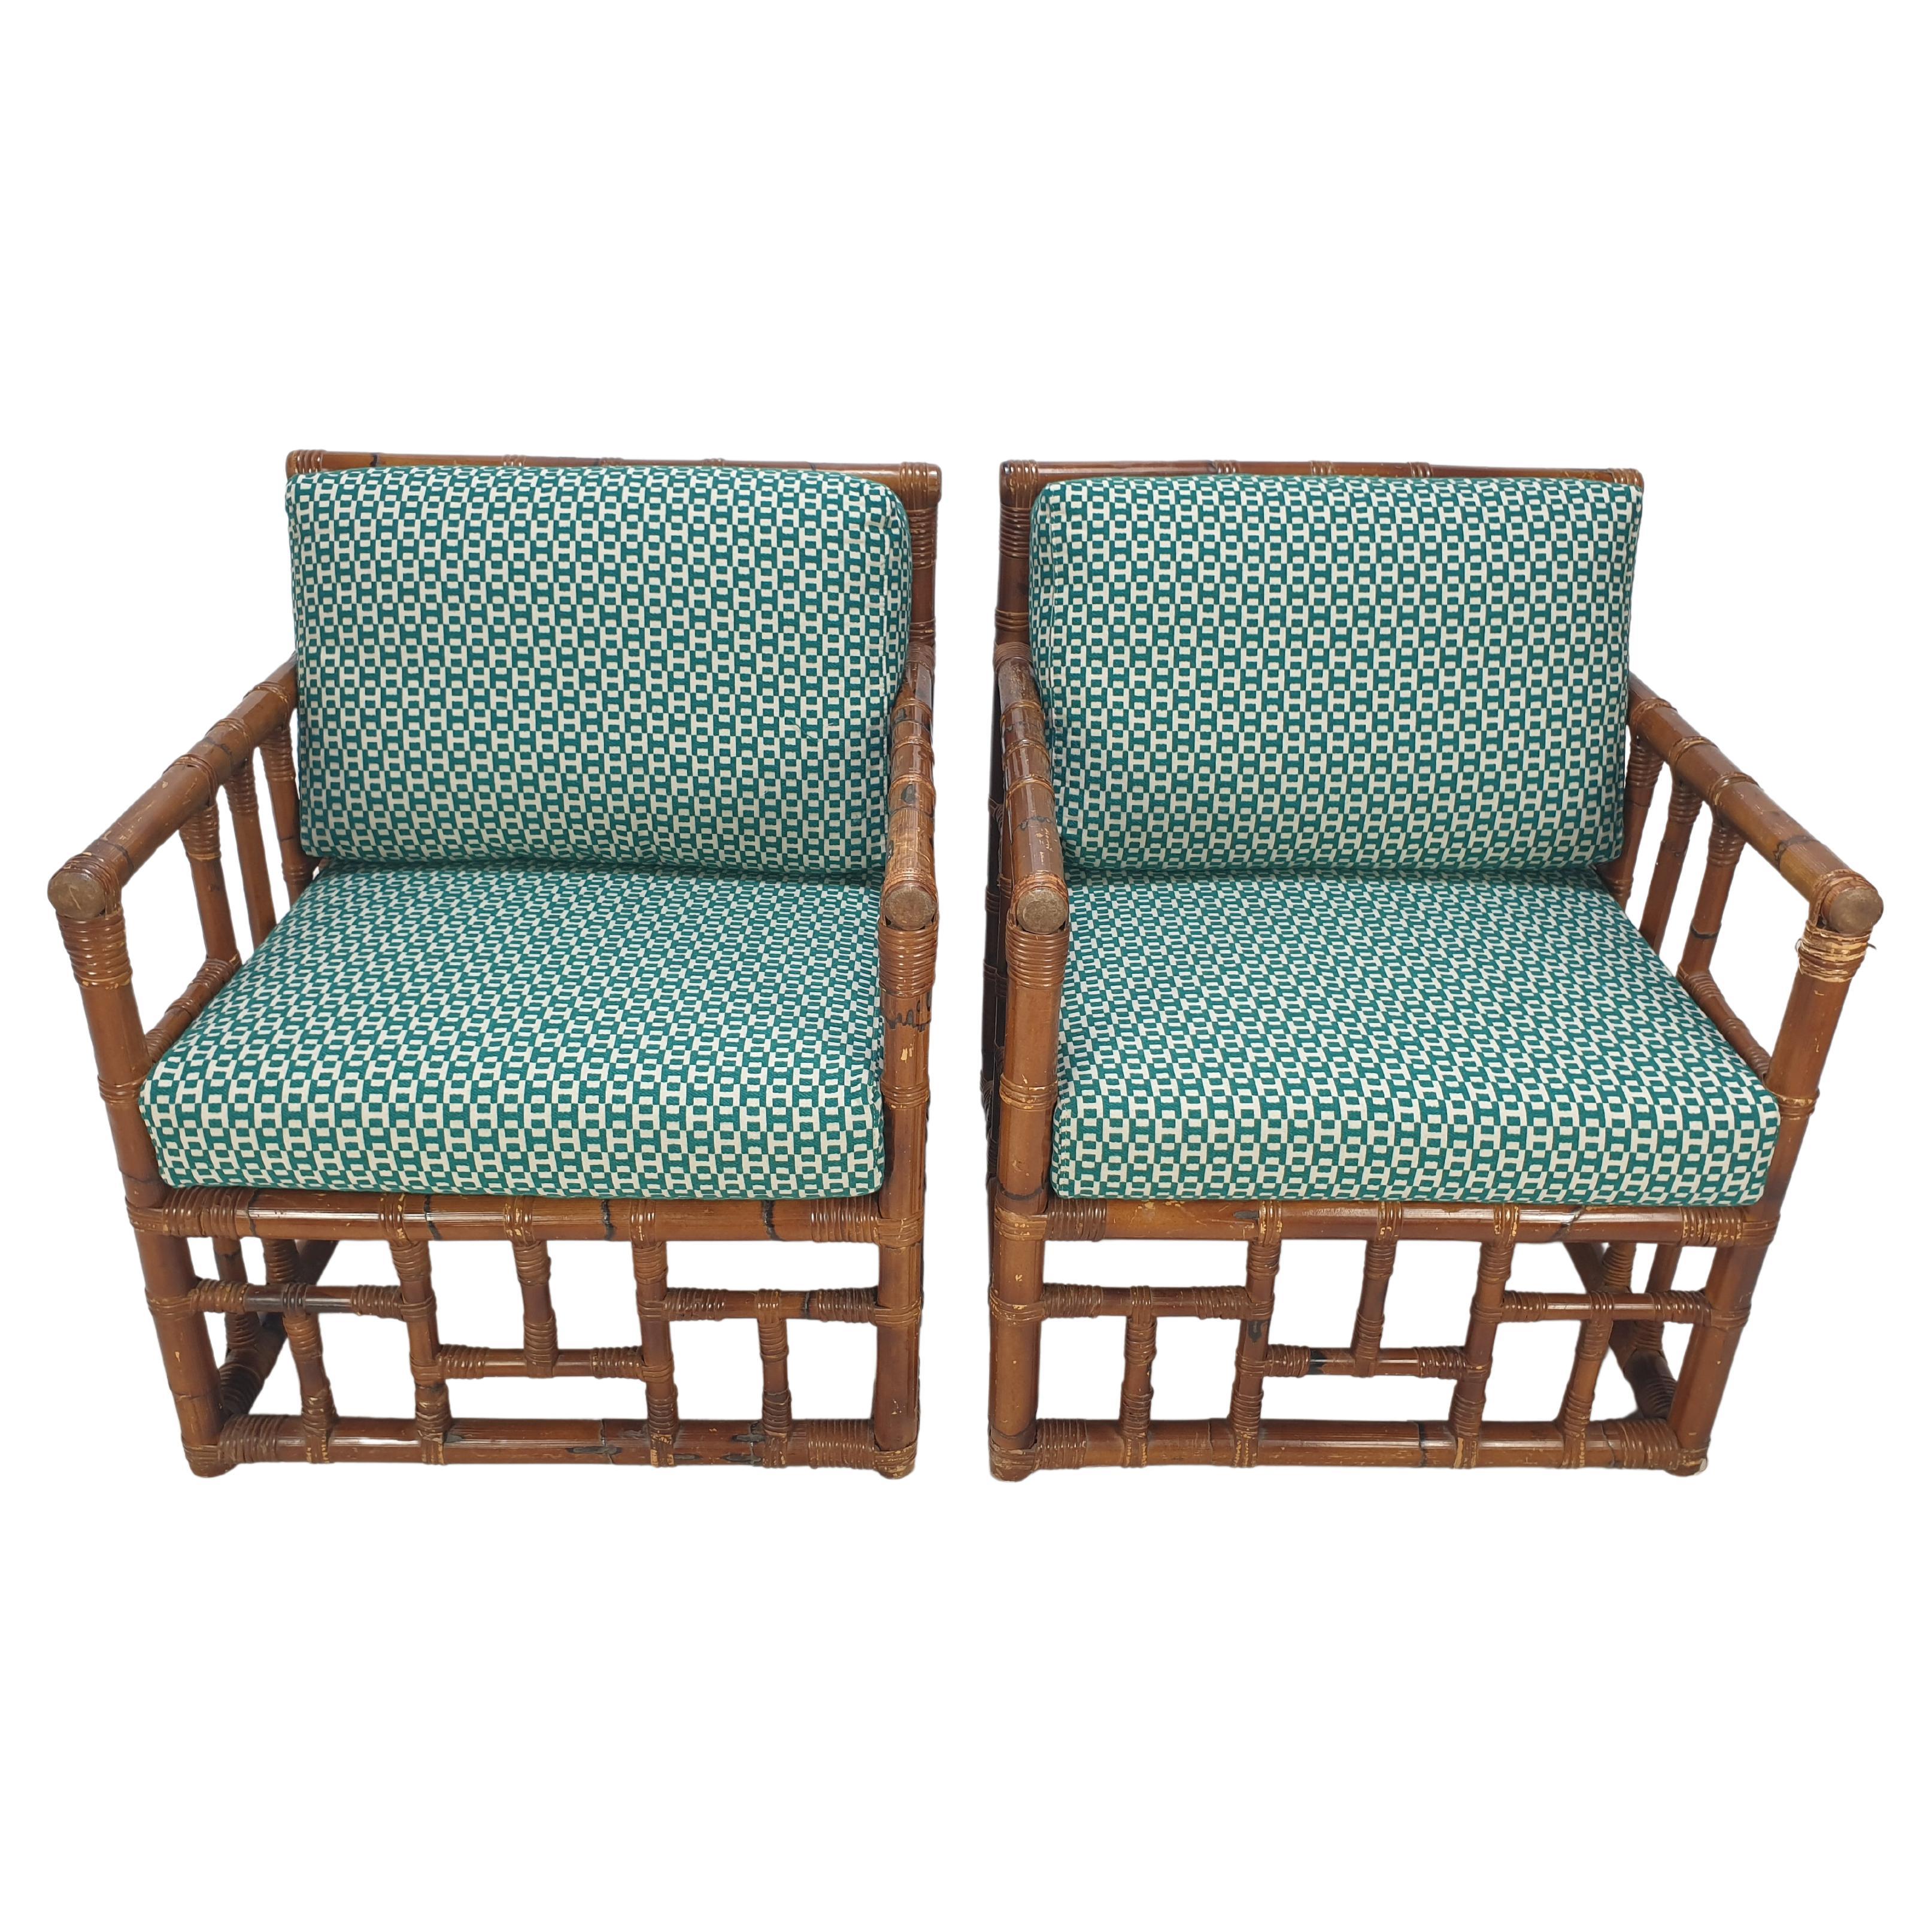 Pair of Italian Bamboo Lounge Chairs with Hermès Upholstery, 1970's